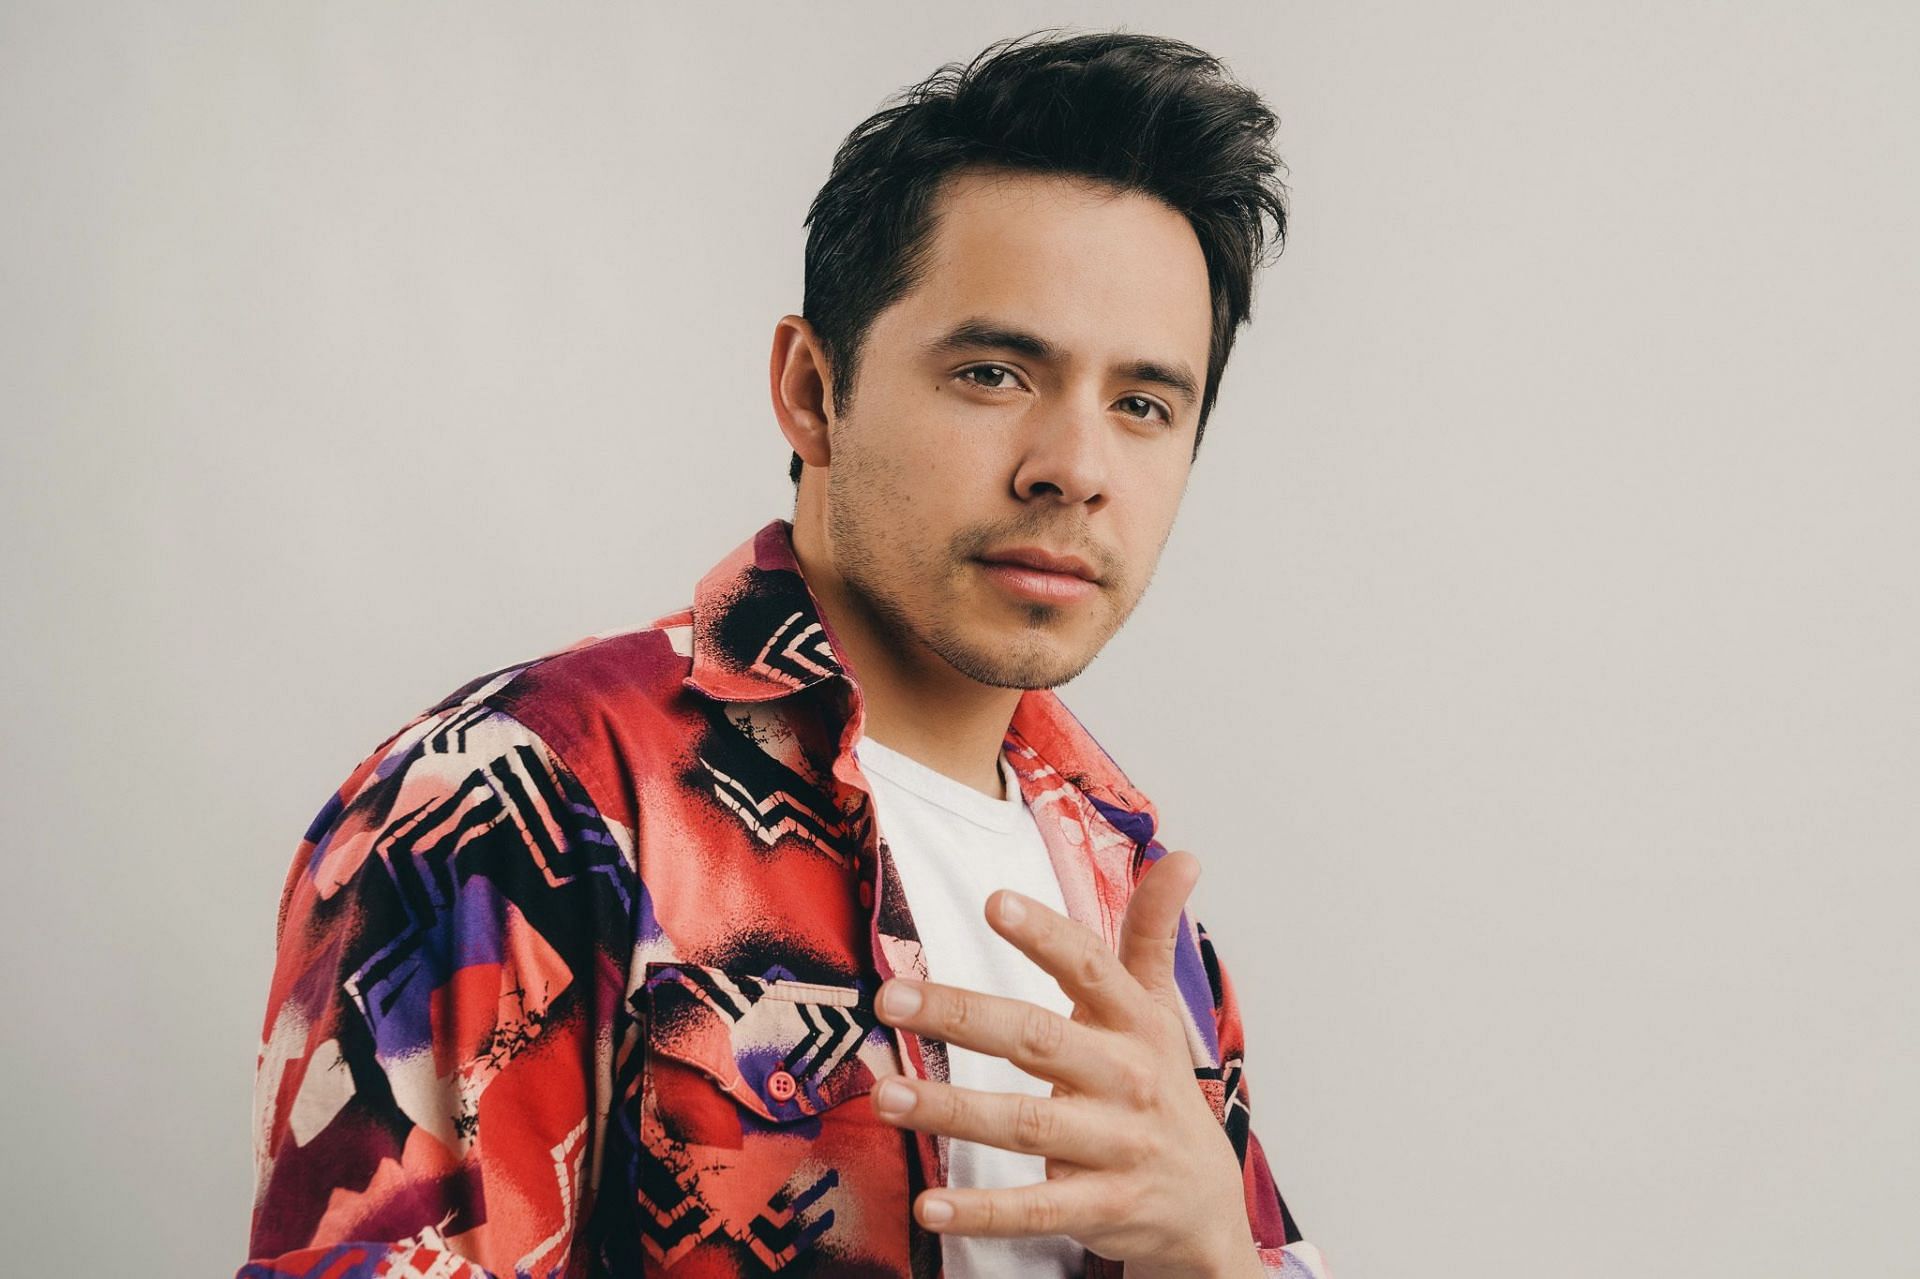 “I've had to deconstruct everything” David Archuleta opens up about